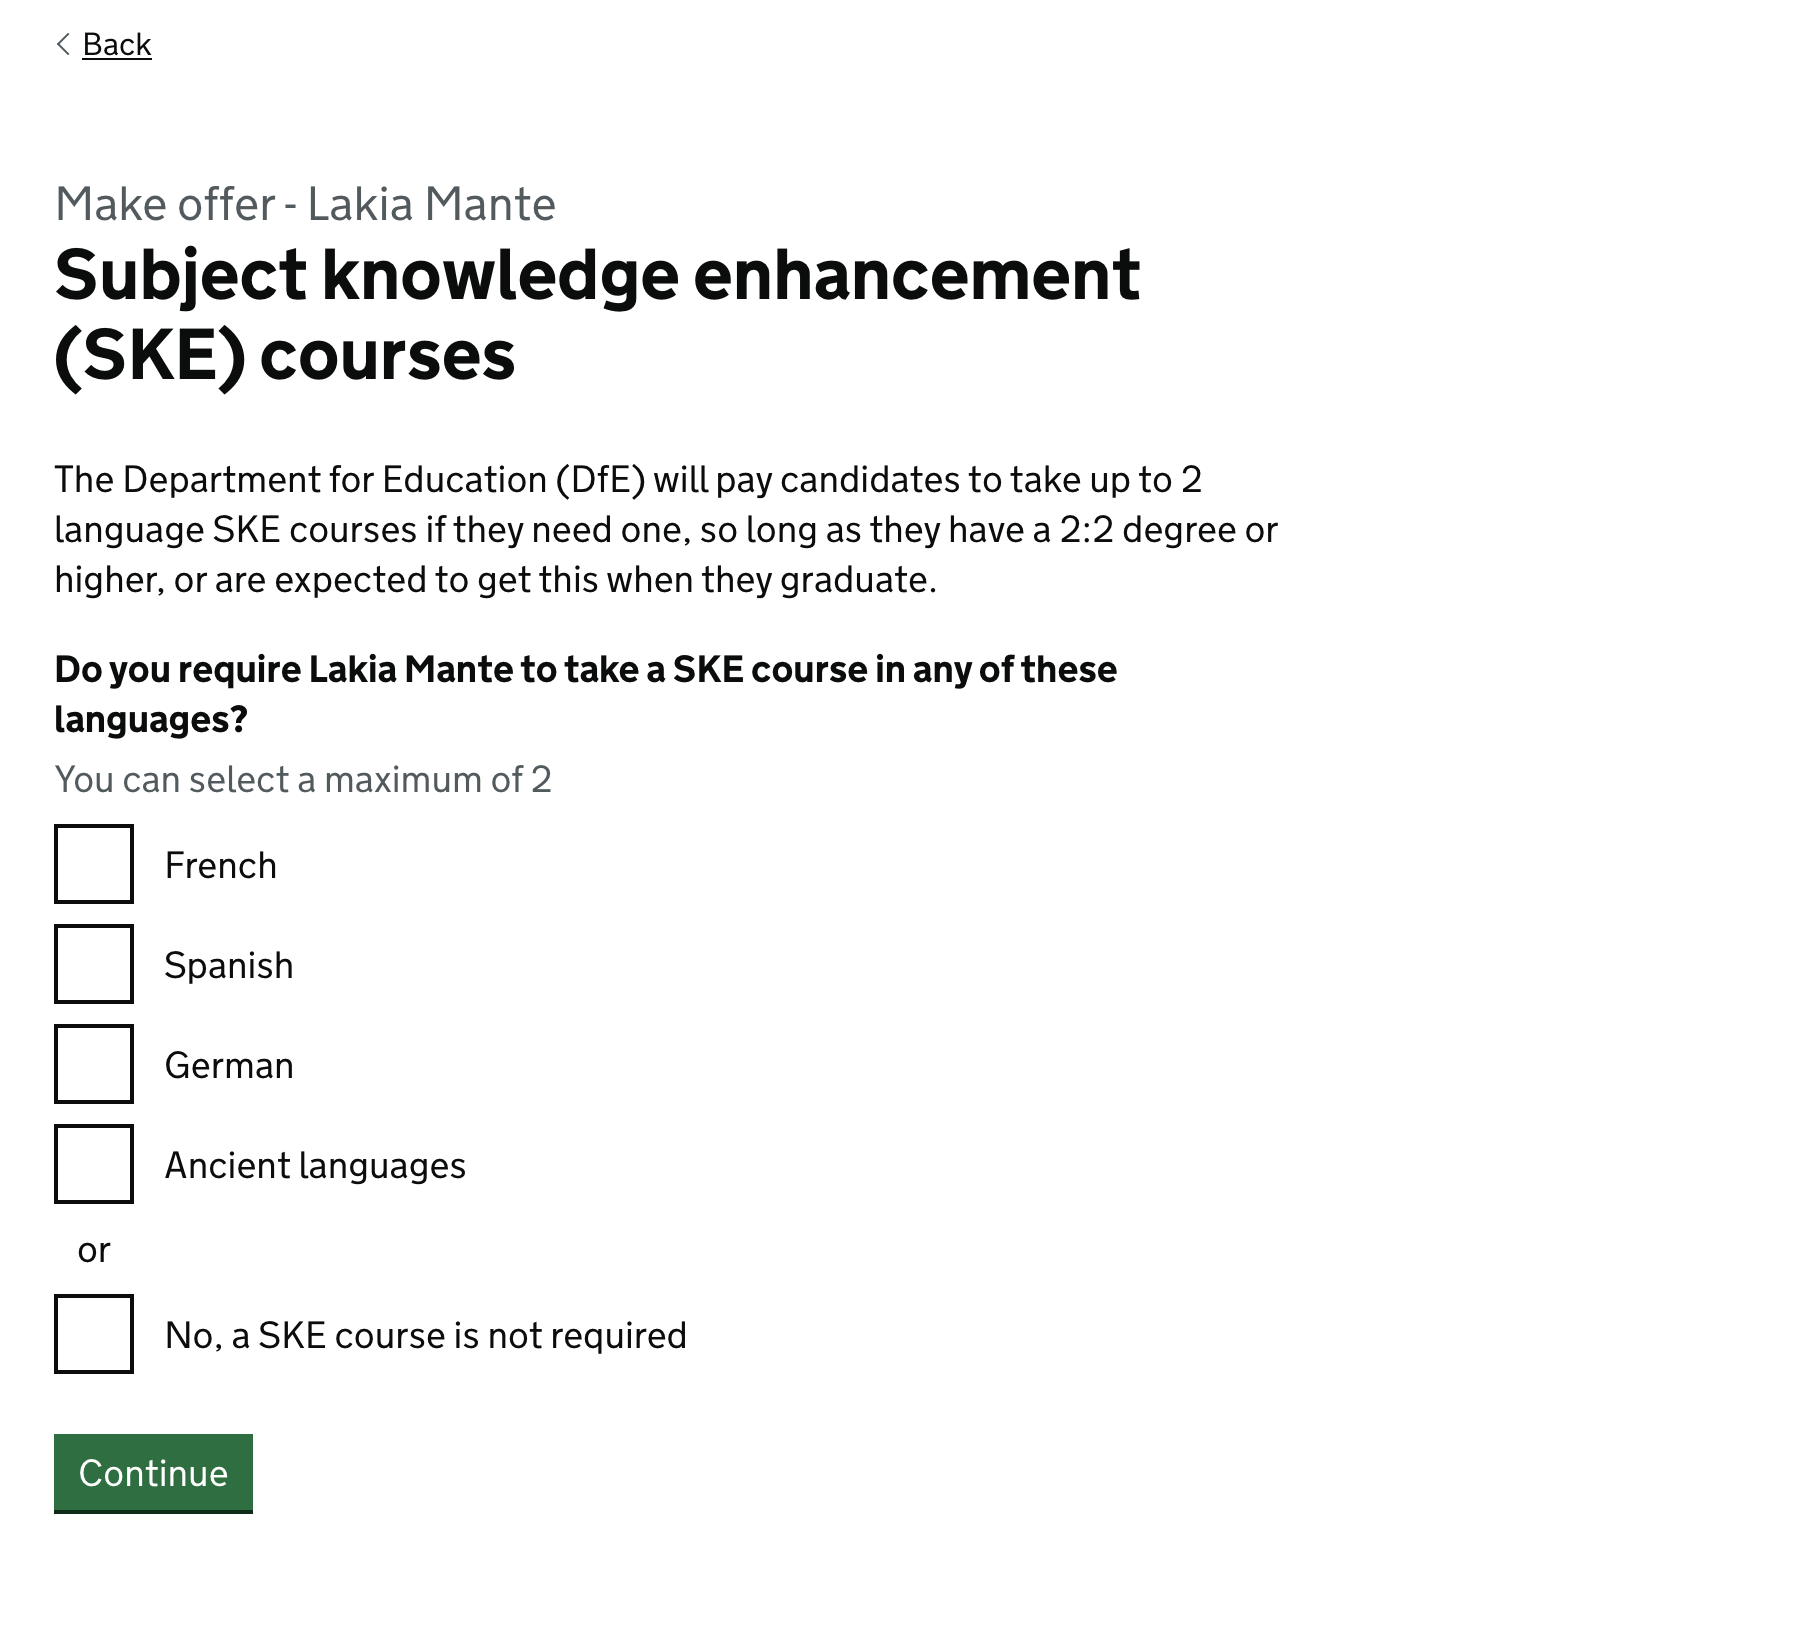 Screenshot with the heading ‘Subject knowledge enhancement (SKE) courses’. Beneath this is the question ‘Do you require Laike Mante to take a SKE course in any of these languages?’. There are then checkboxes for French, Spanish, German, Ancient languages, and ‘No, a SKE course is not required’